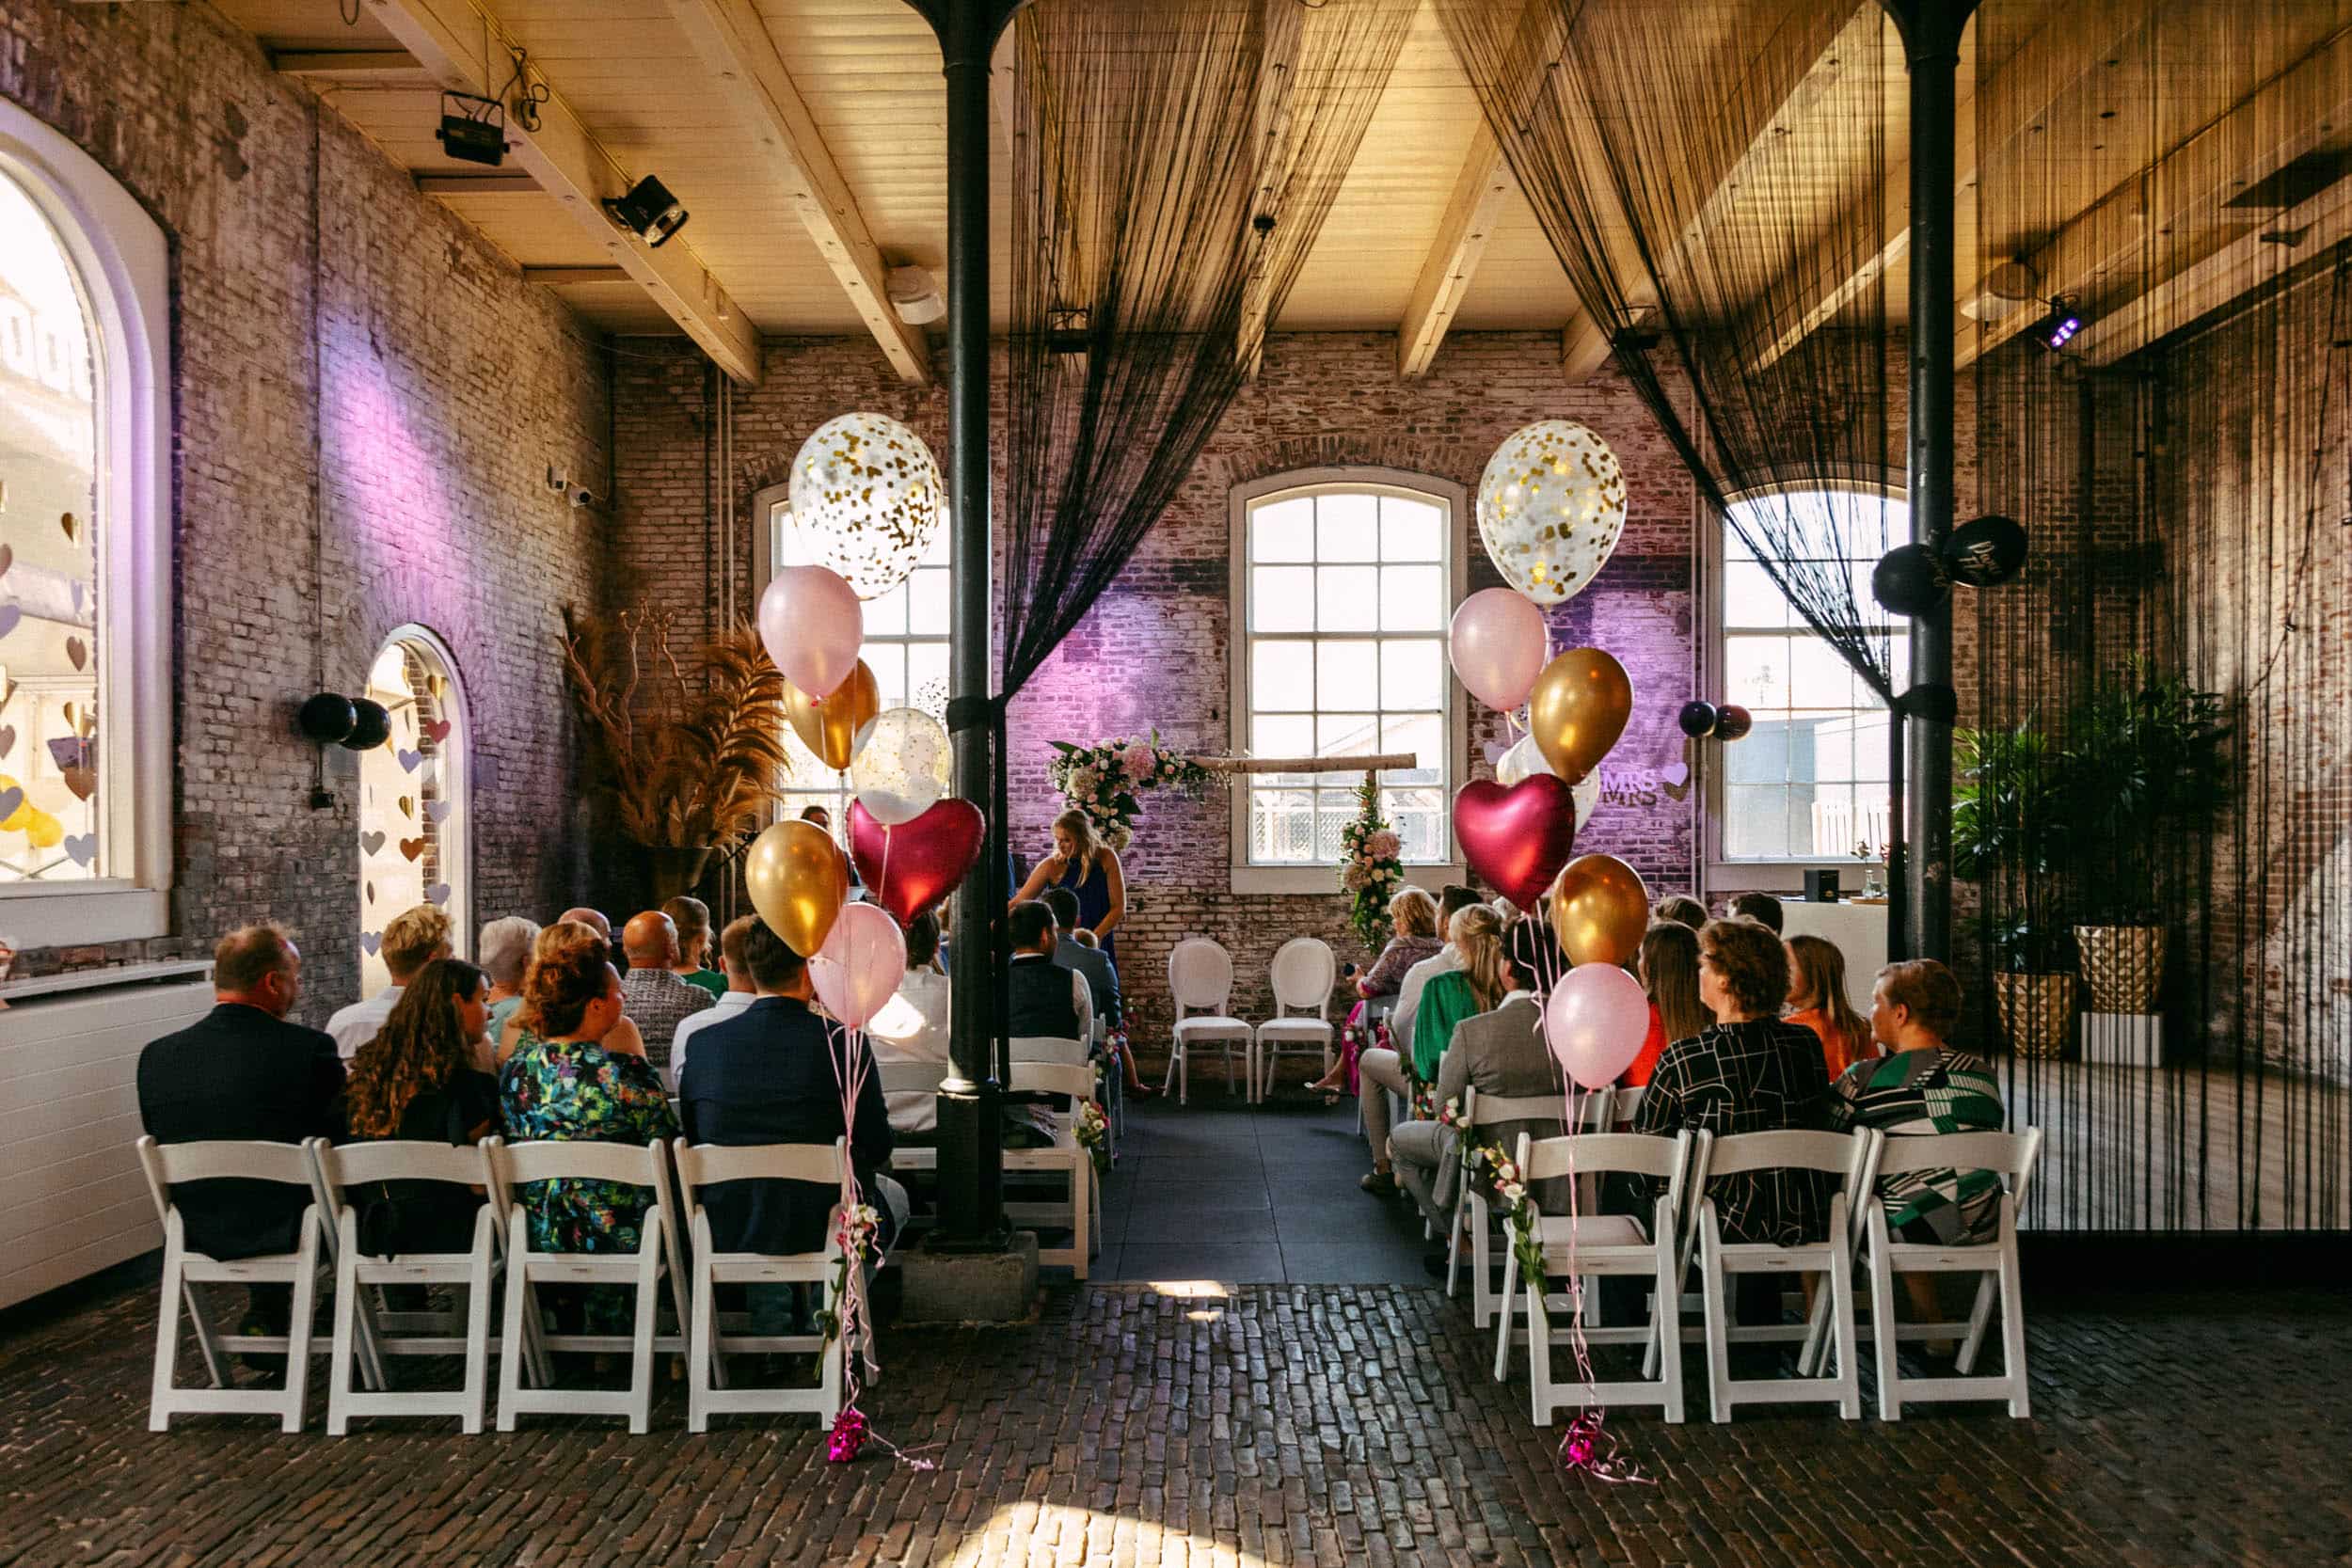 My torpedo shed, a wedding ceremony with balloons.